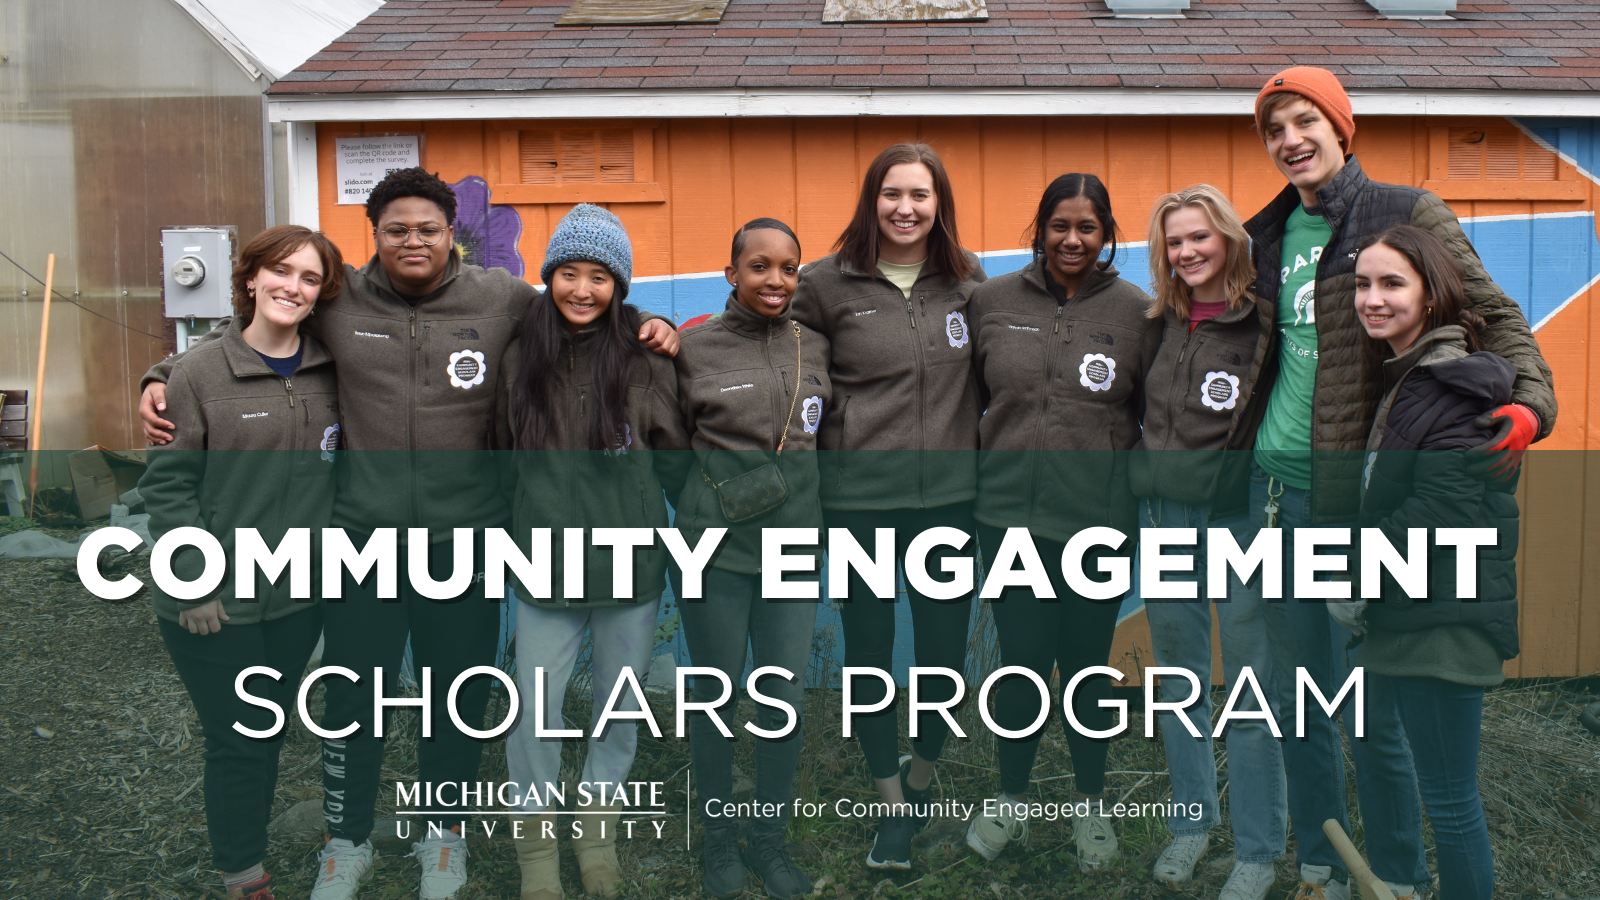 A group of young people in brown CESP jackets, smiling in front of a Community Engagement Scholars Program banner